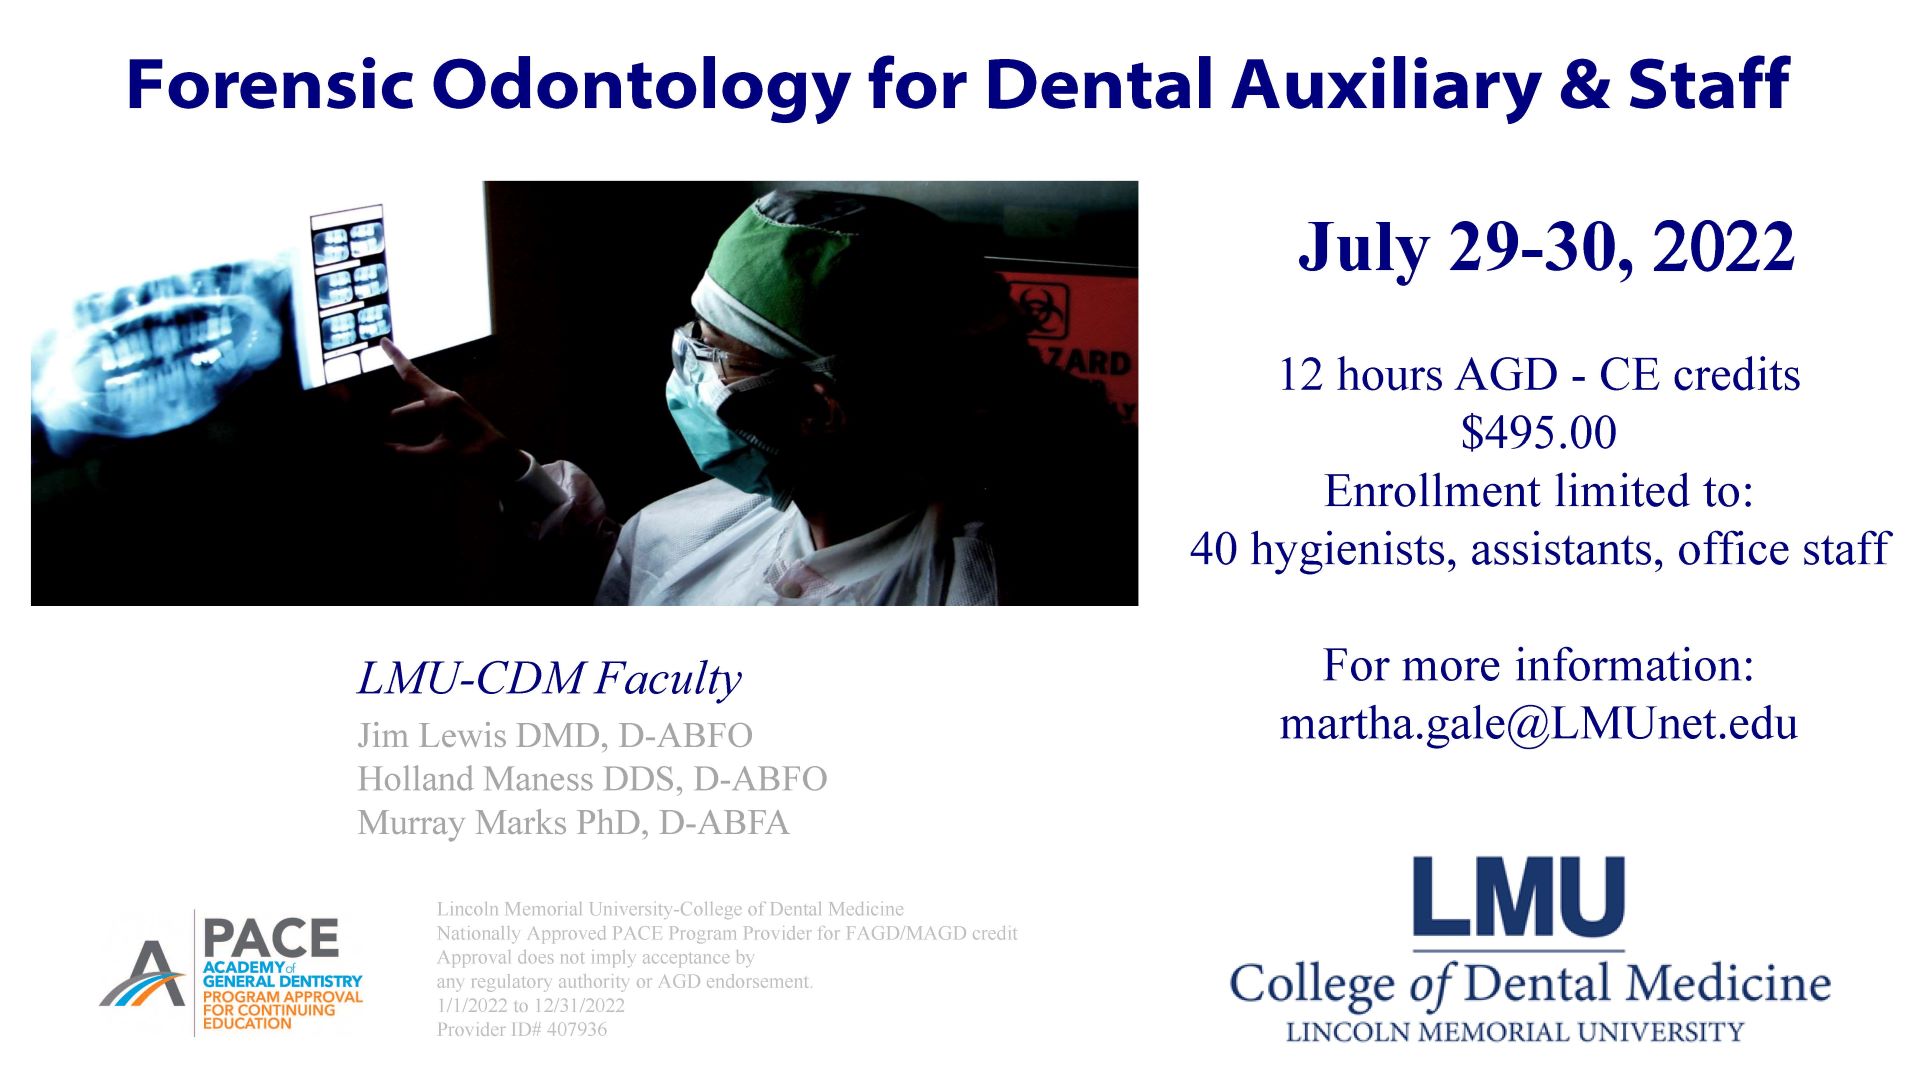 Forensic Odontology for Dental Auxiliary & Staff Flyer